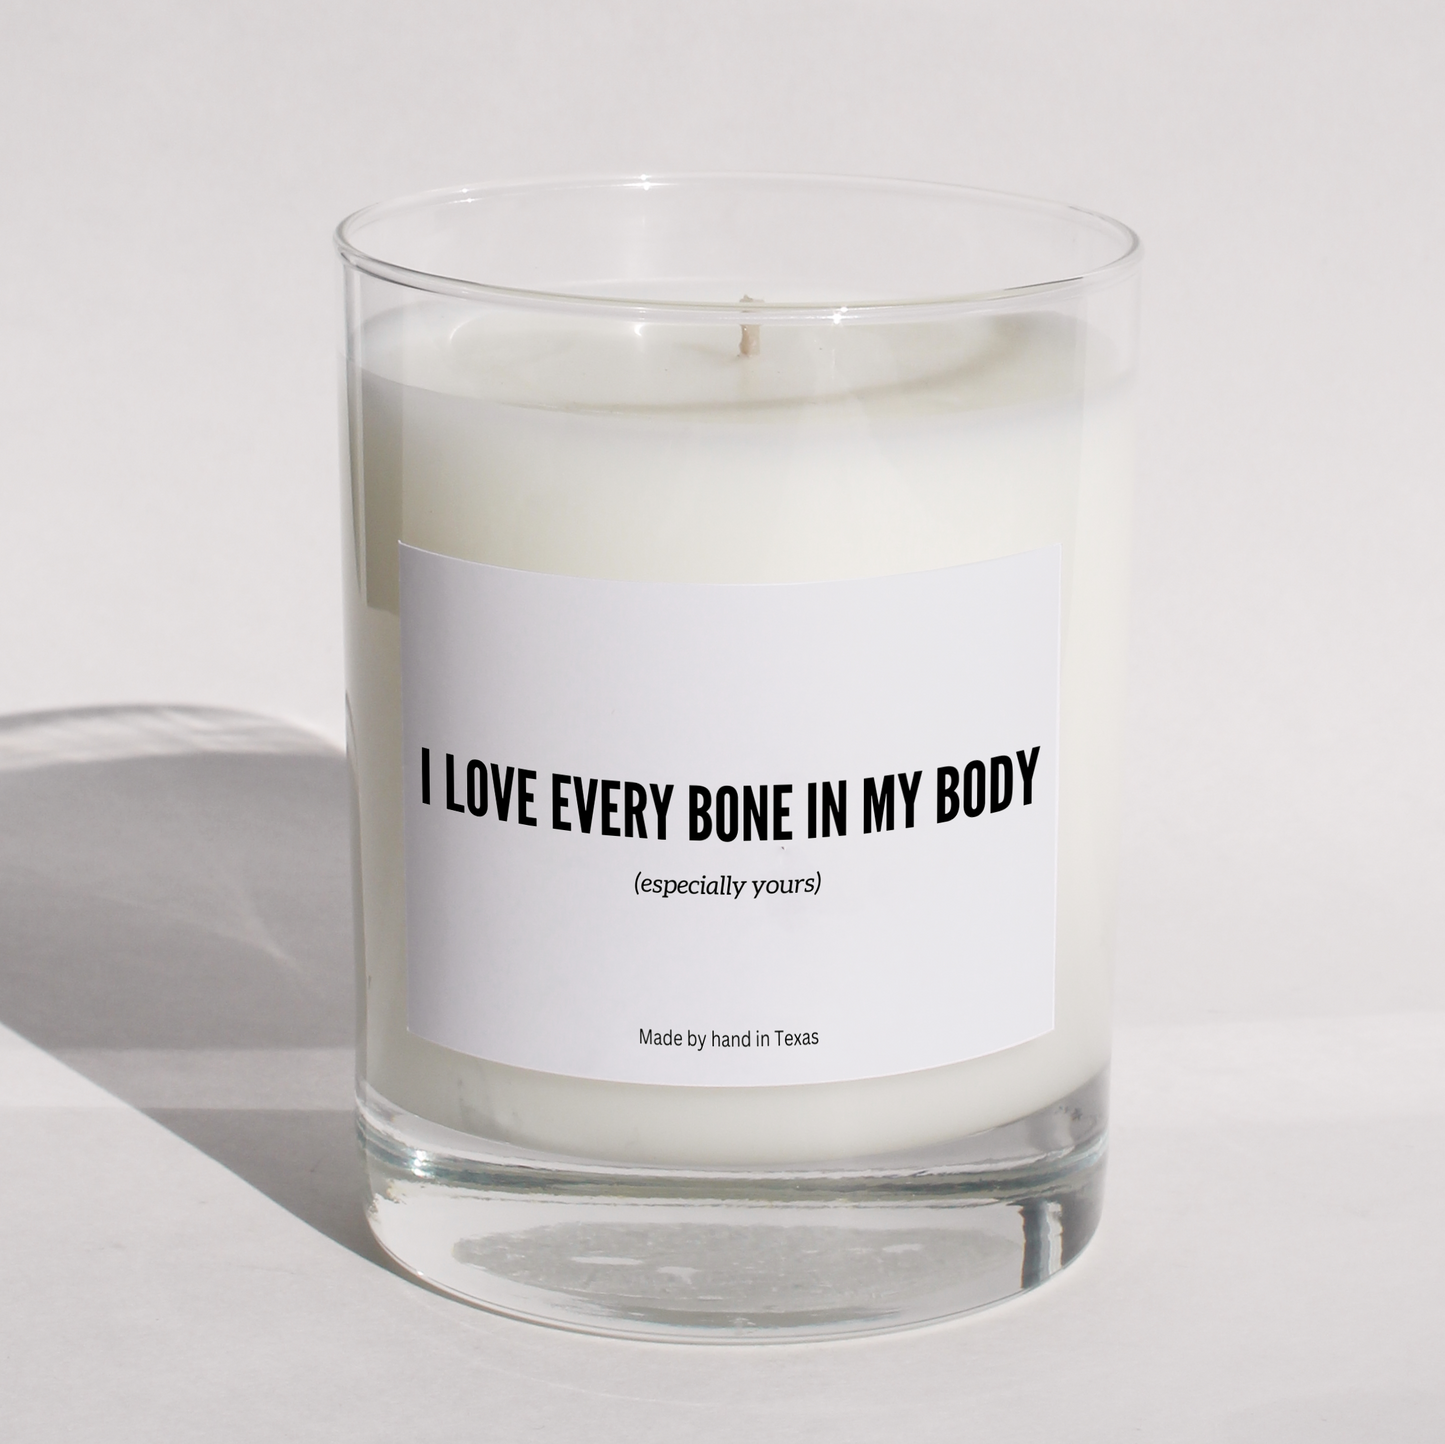 I love every bone in my body (especially yours) - Naughty Candle